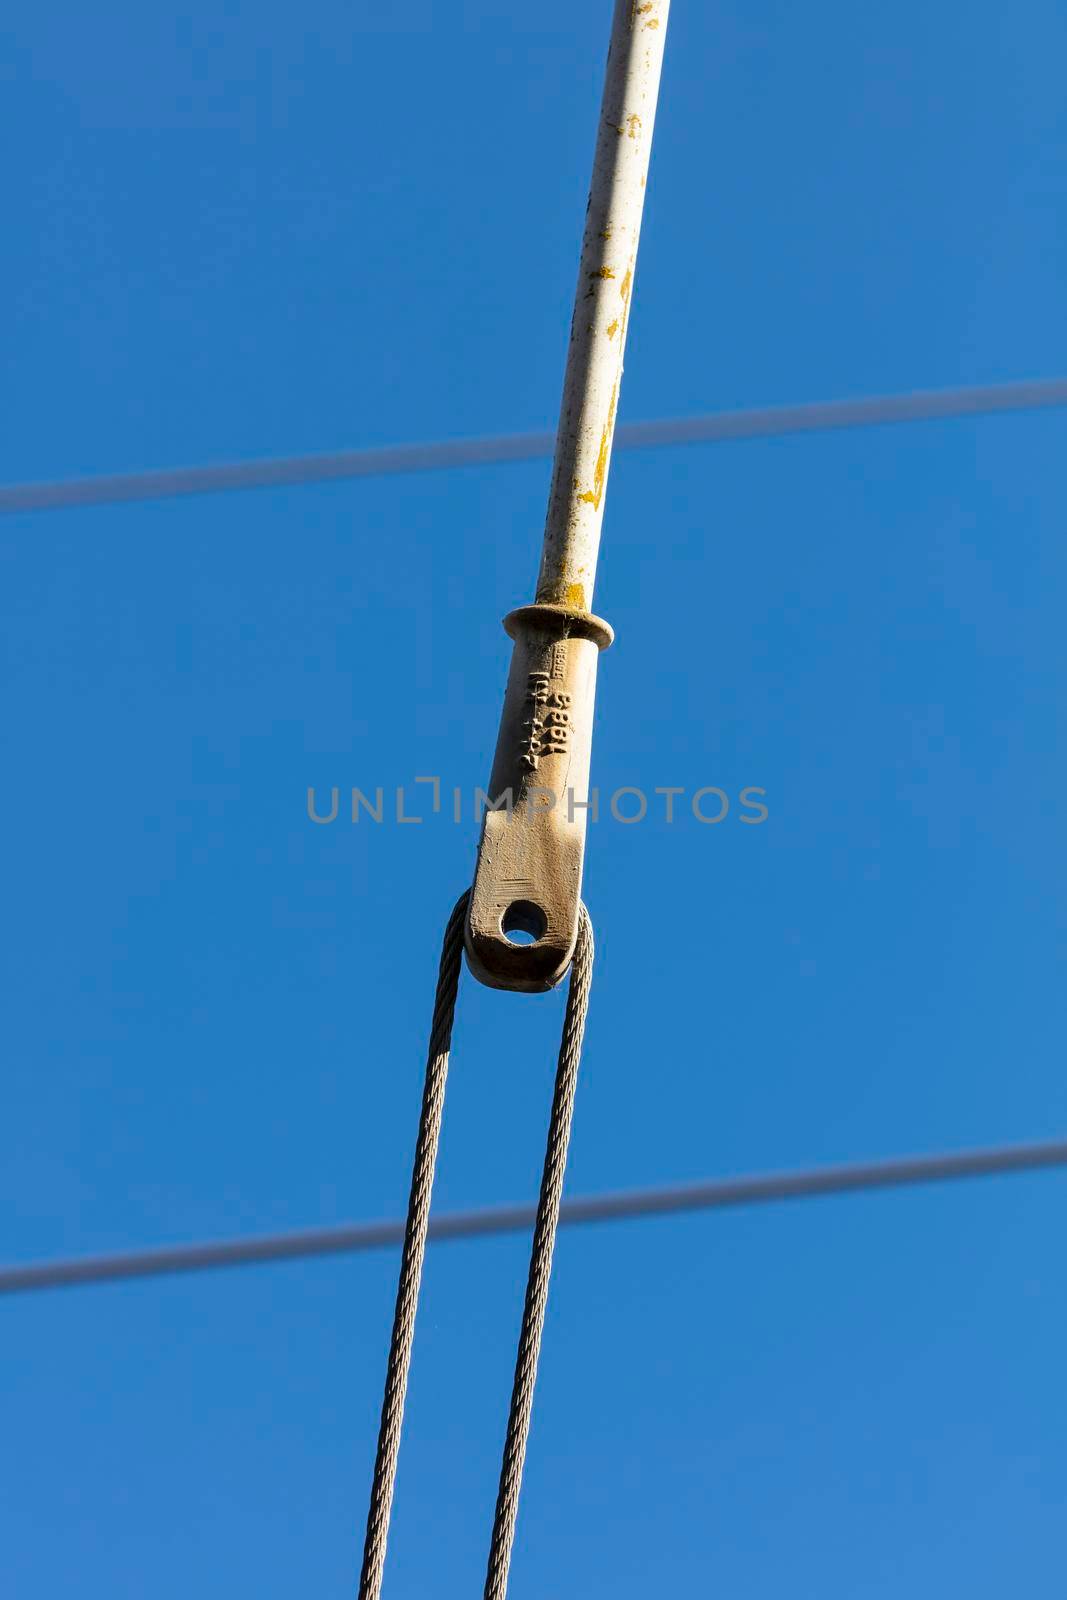 Photograph of a tensioner bracket on a transmission line by WittkePhotos